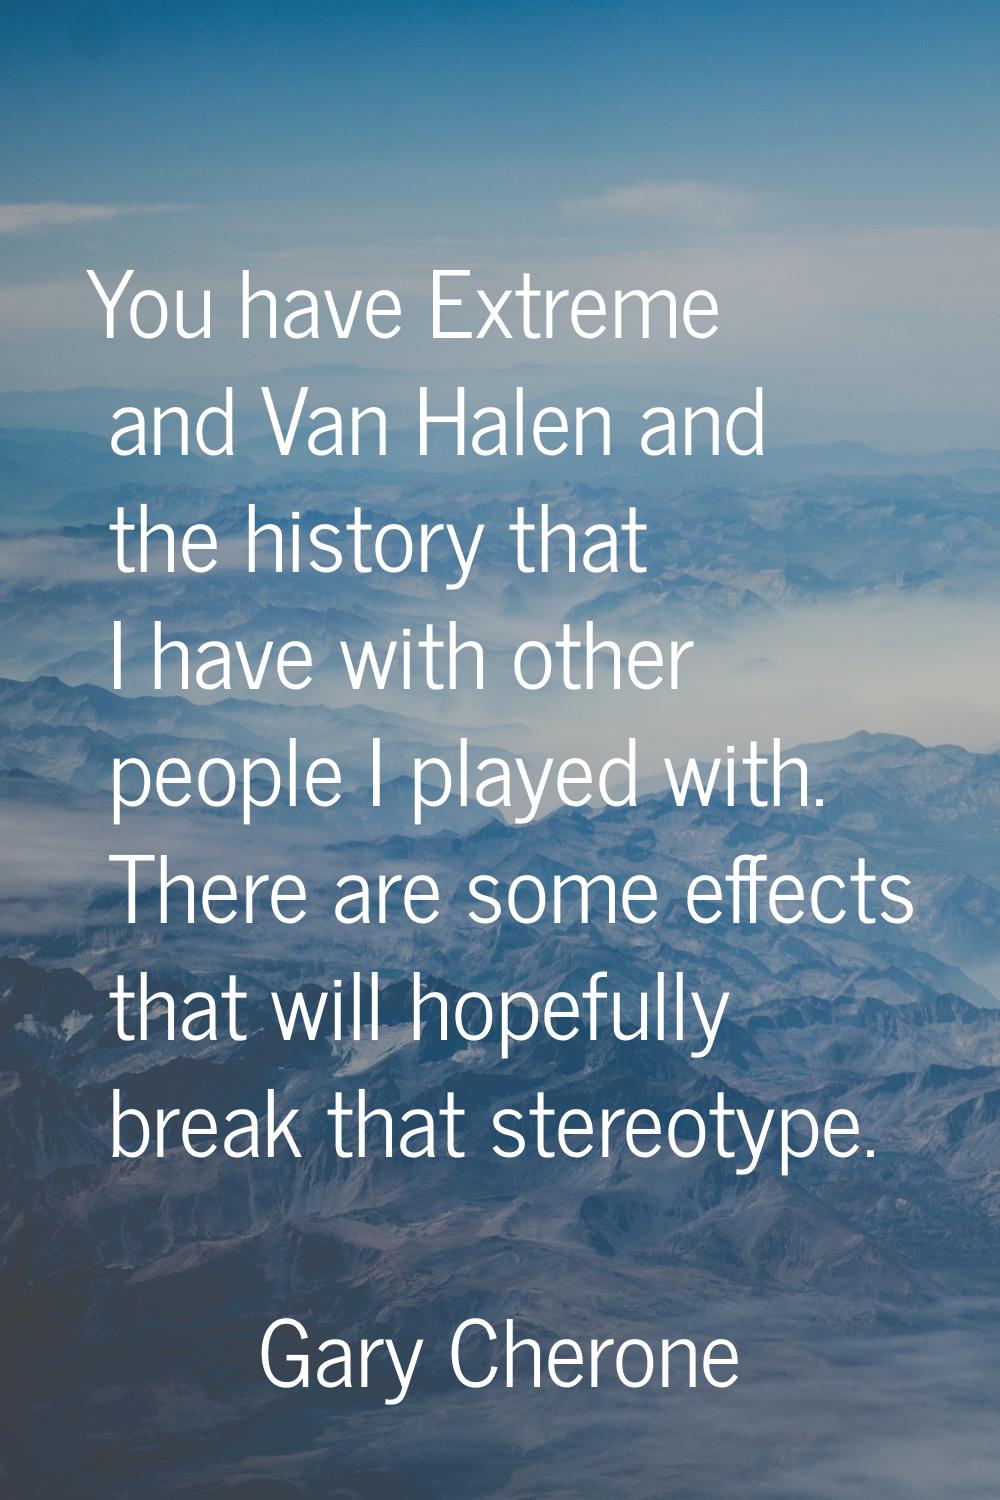 You have Extreme and Van Halen and the history that I have with other people I played with. There a